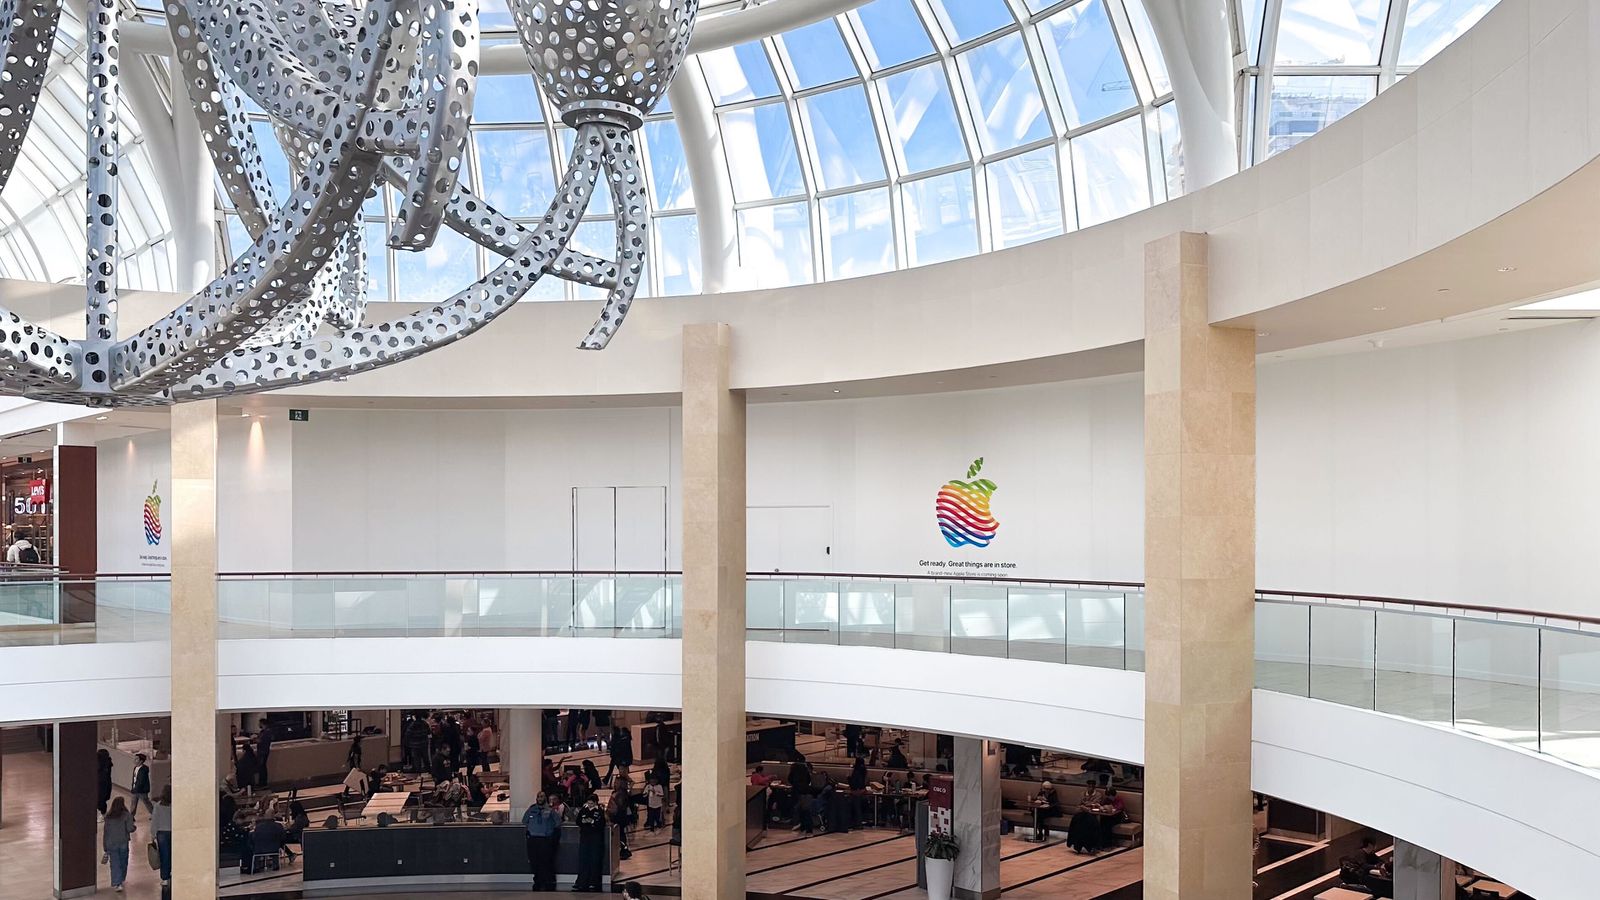 Apple Teases New Store 'Coming Soon' at Square One Mall Near